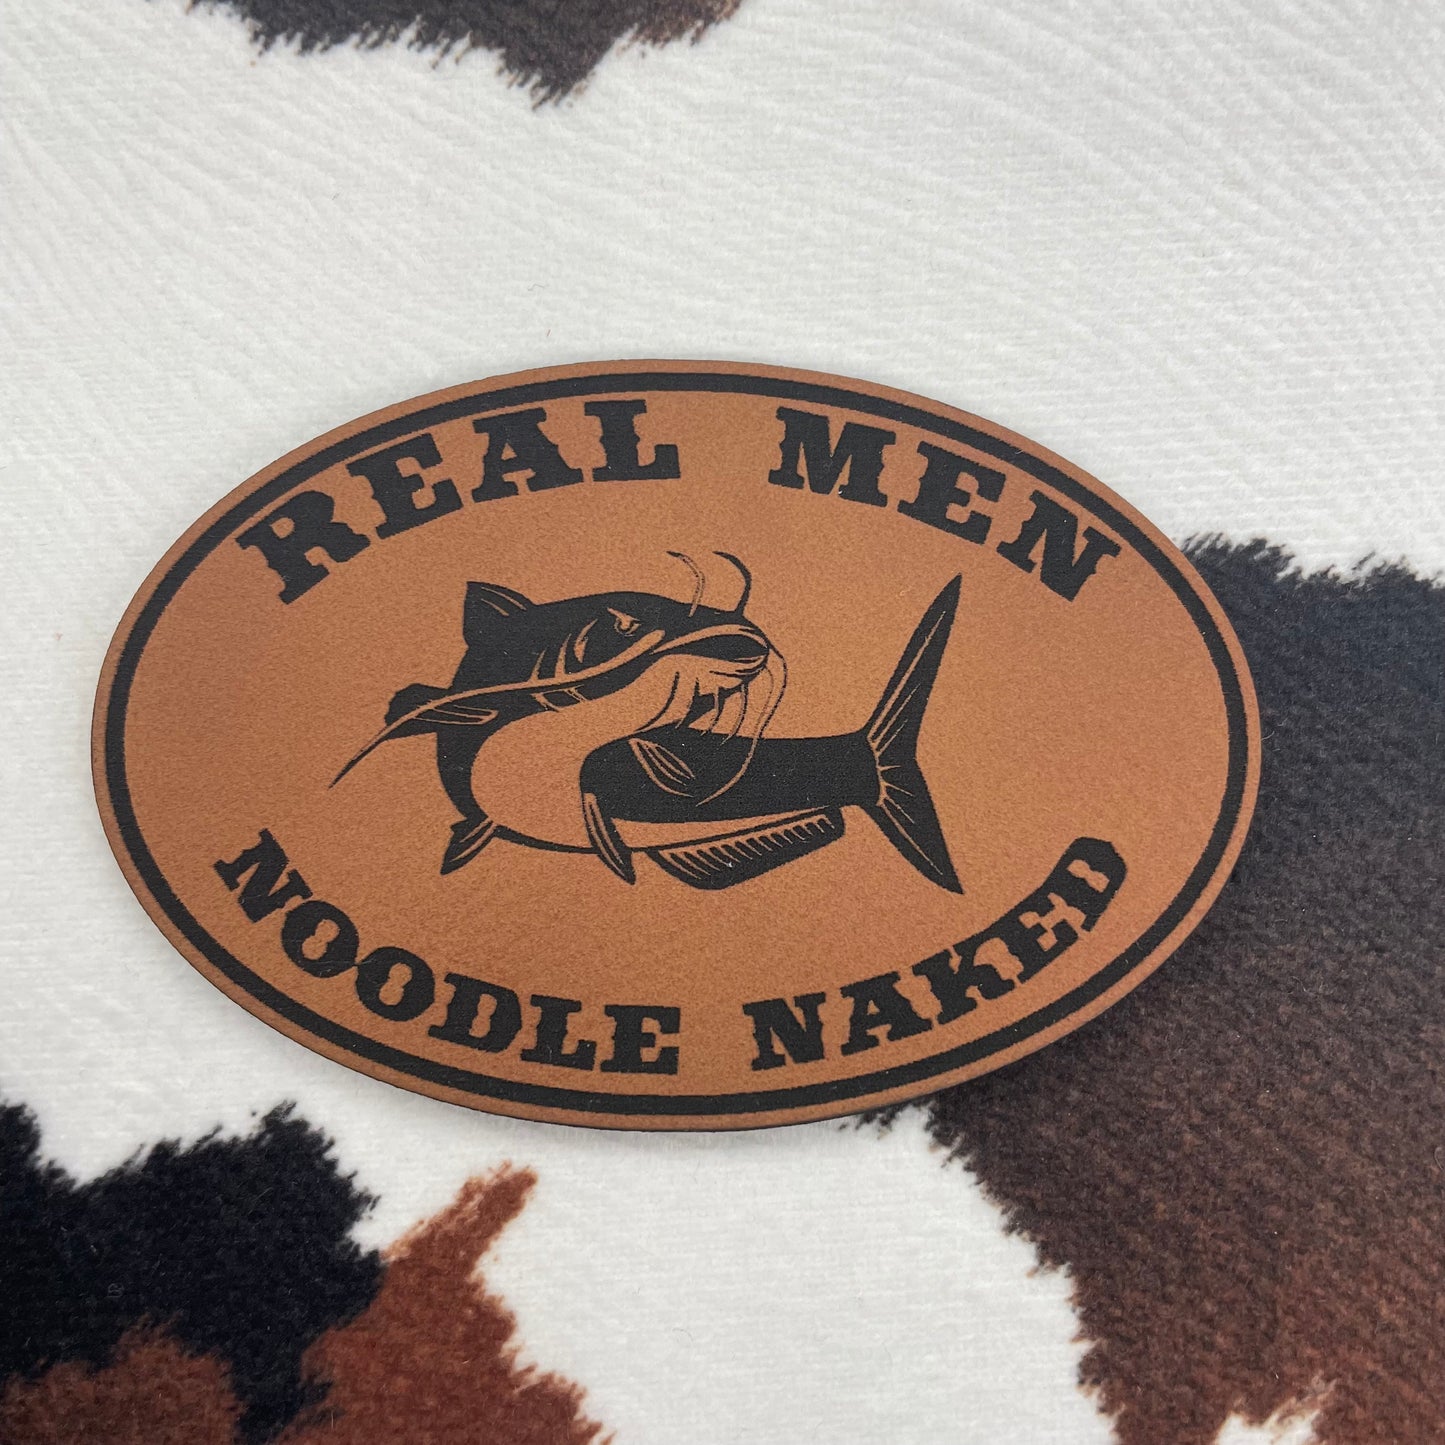 Real Men Noodle Naked- 3.25" wide x 2.2" tall Leatherette Patch